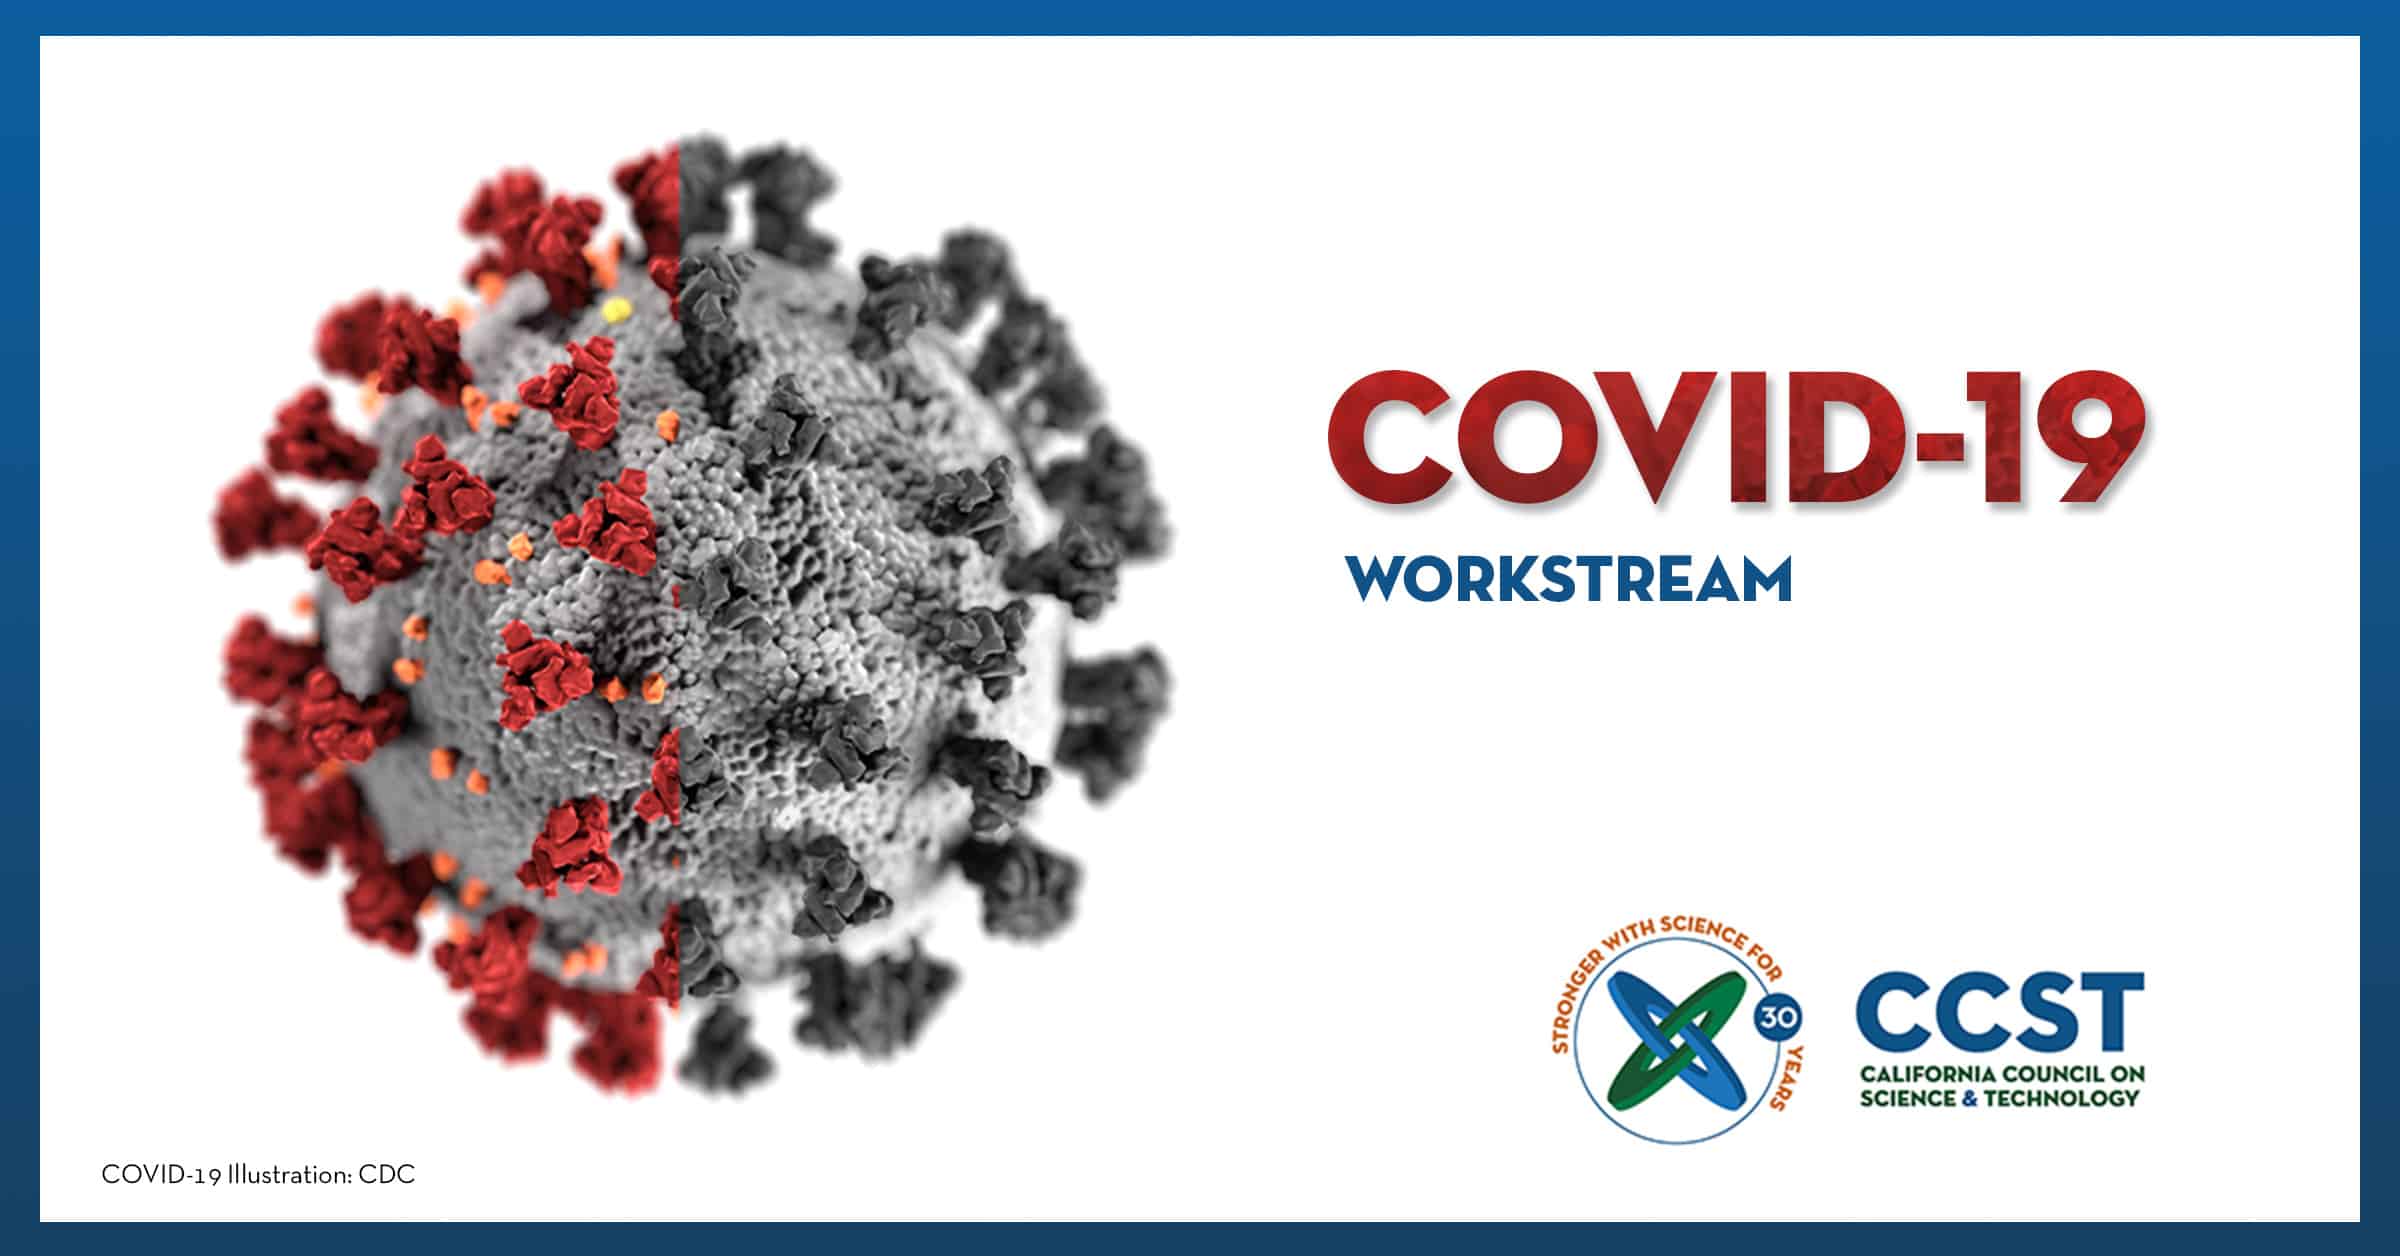 An illustration of COVID-19 by the CDC half in color and half in black and white with a blue border and CCST logo